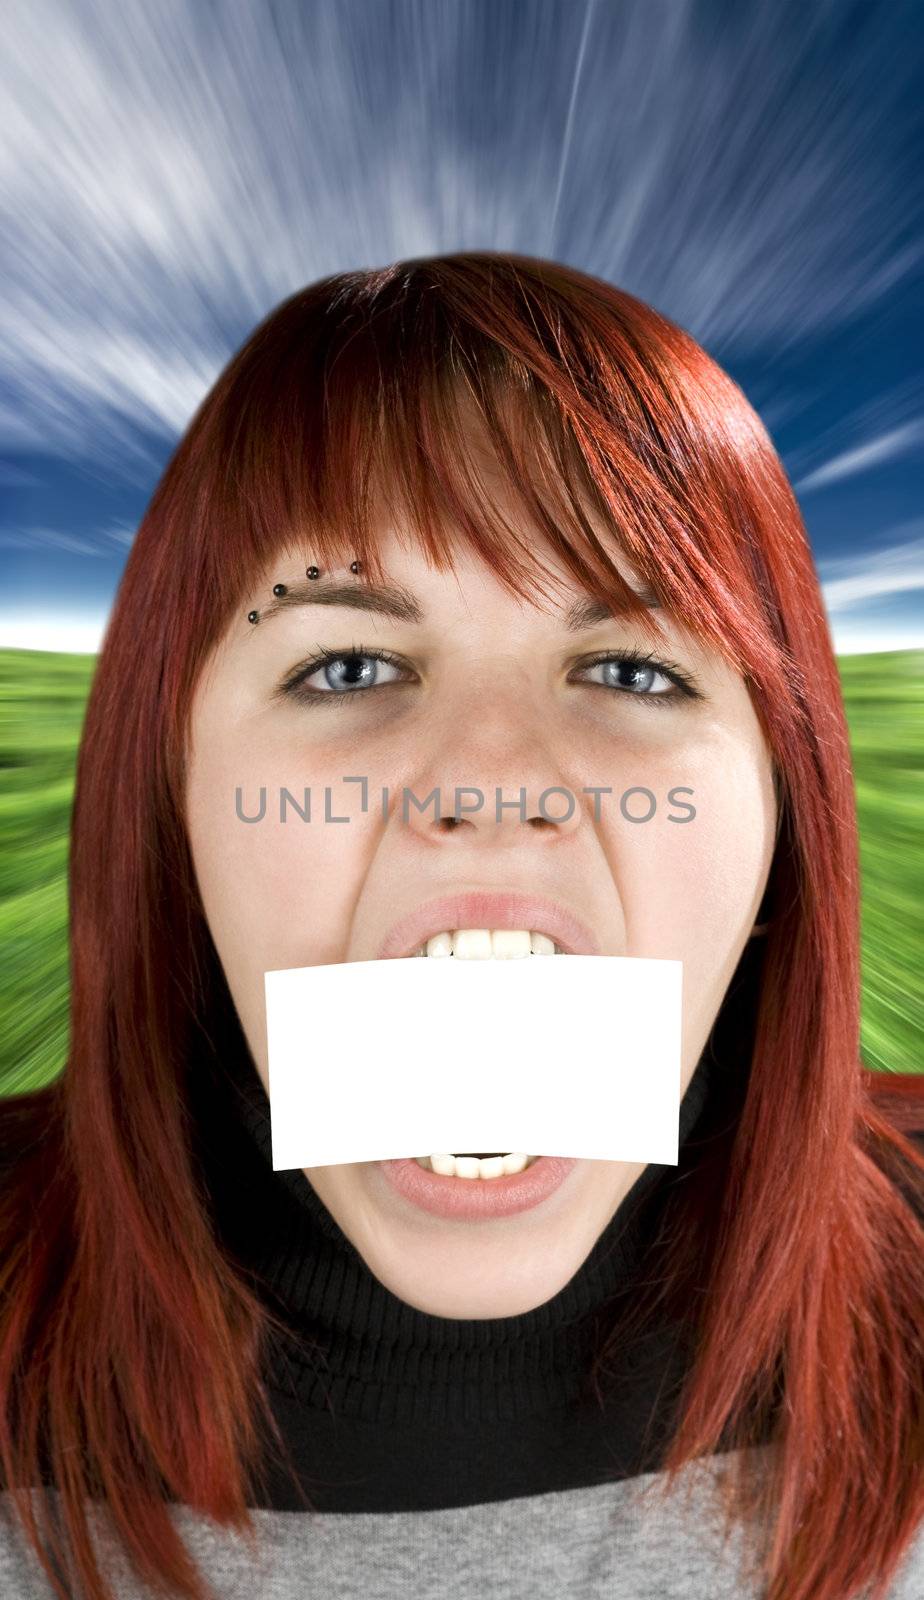 Redhead girl aggressively biting or eating a blank greeting card. Concept expresses nutrition or eating disorder problems.

Studio shot.

Studio shot.